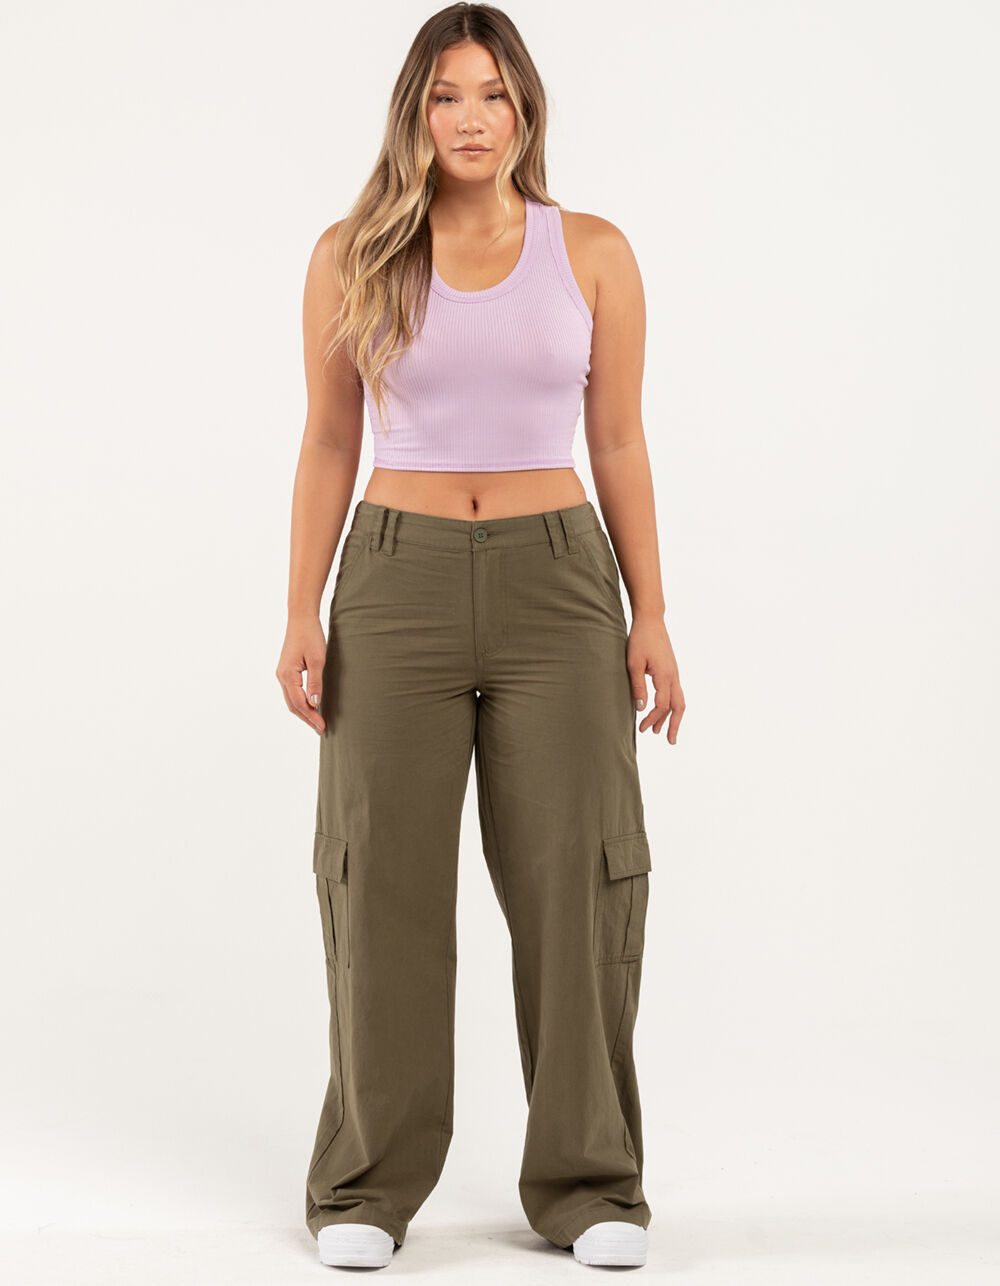 RSQ Womens Low Rise Cargo Pants - DK GREEN